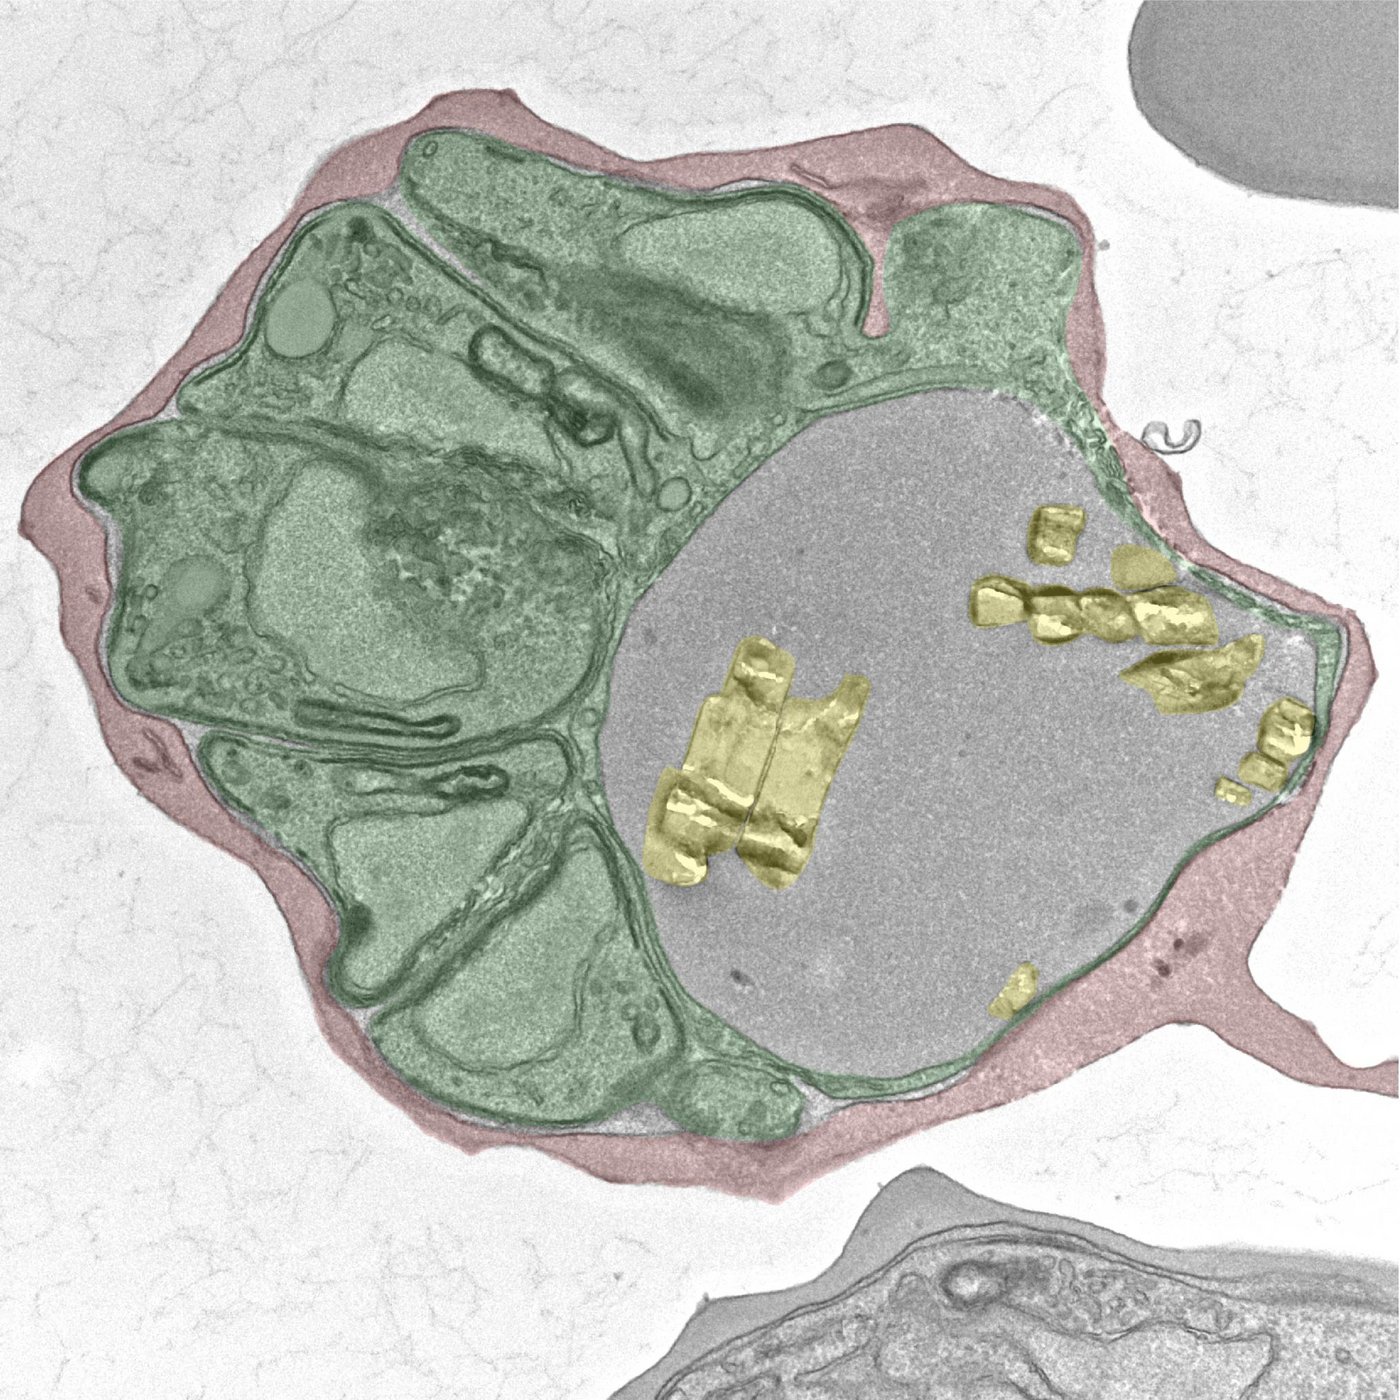 Image shows a pseudo-colorized transmission electron microscopy image of a Plasmodium falciparum-infected red blood cell